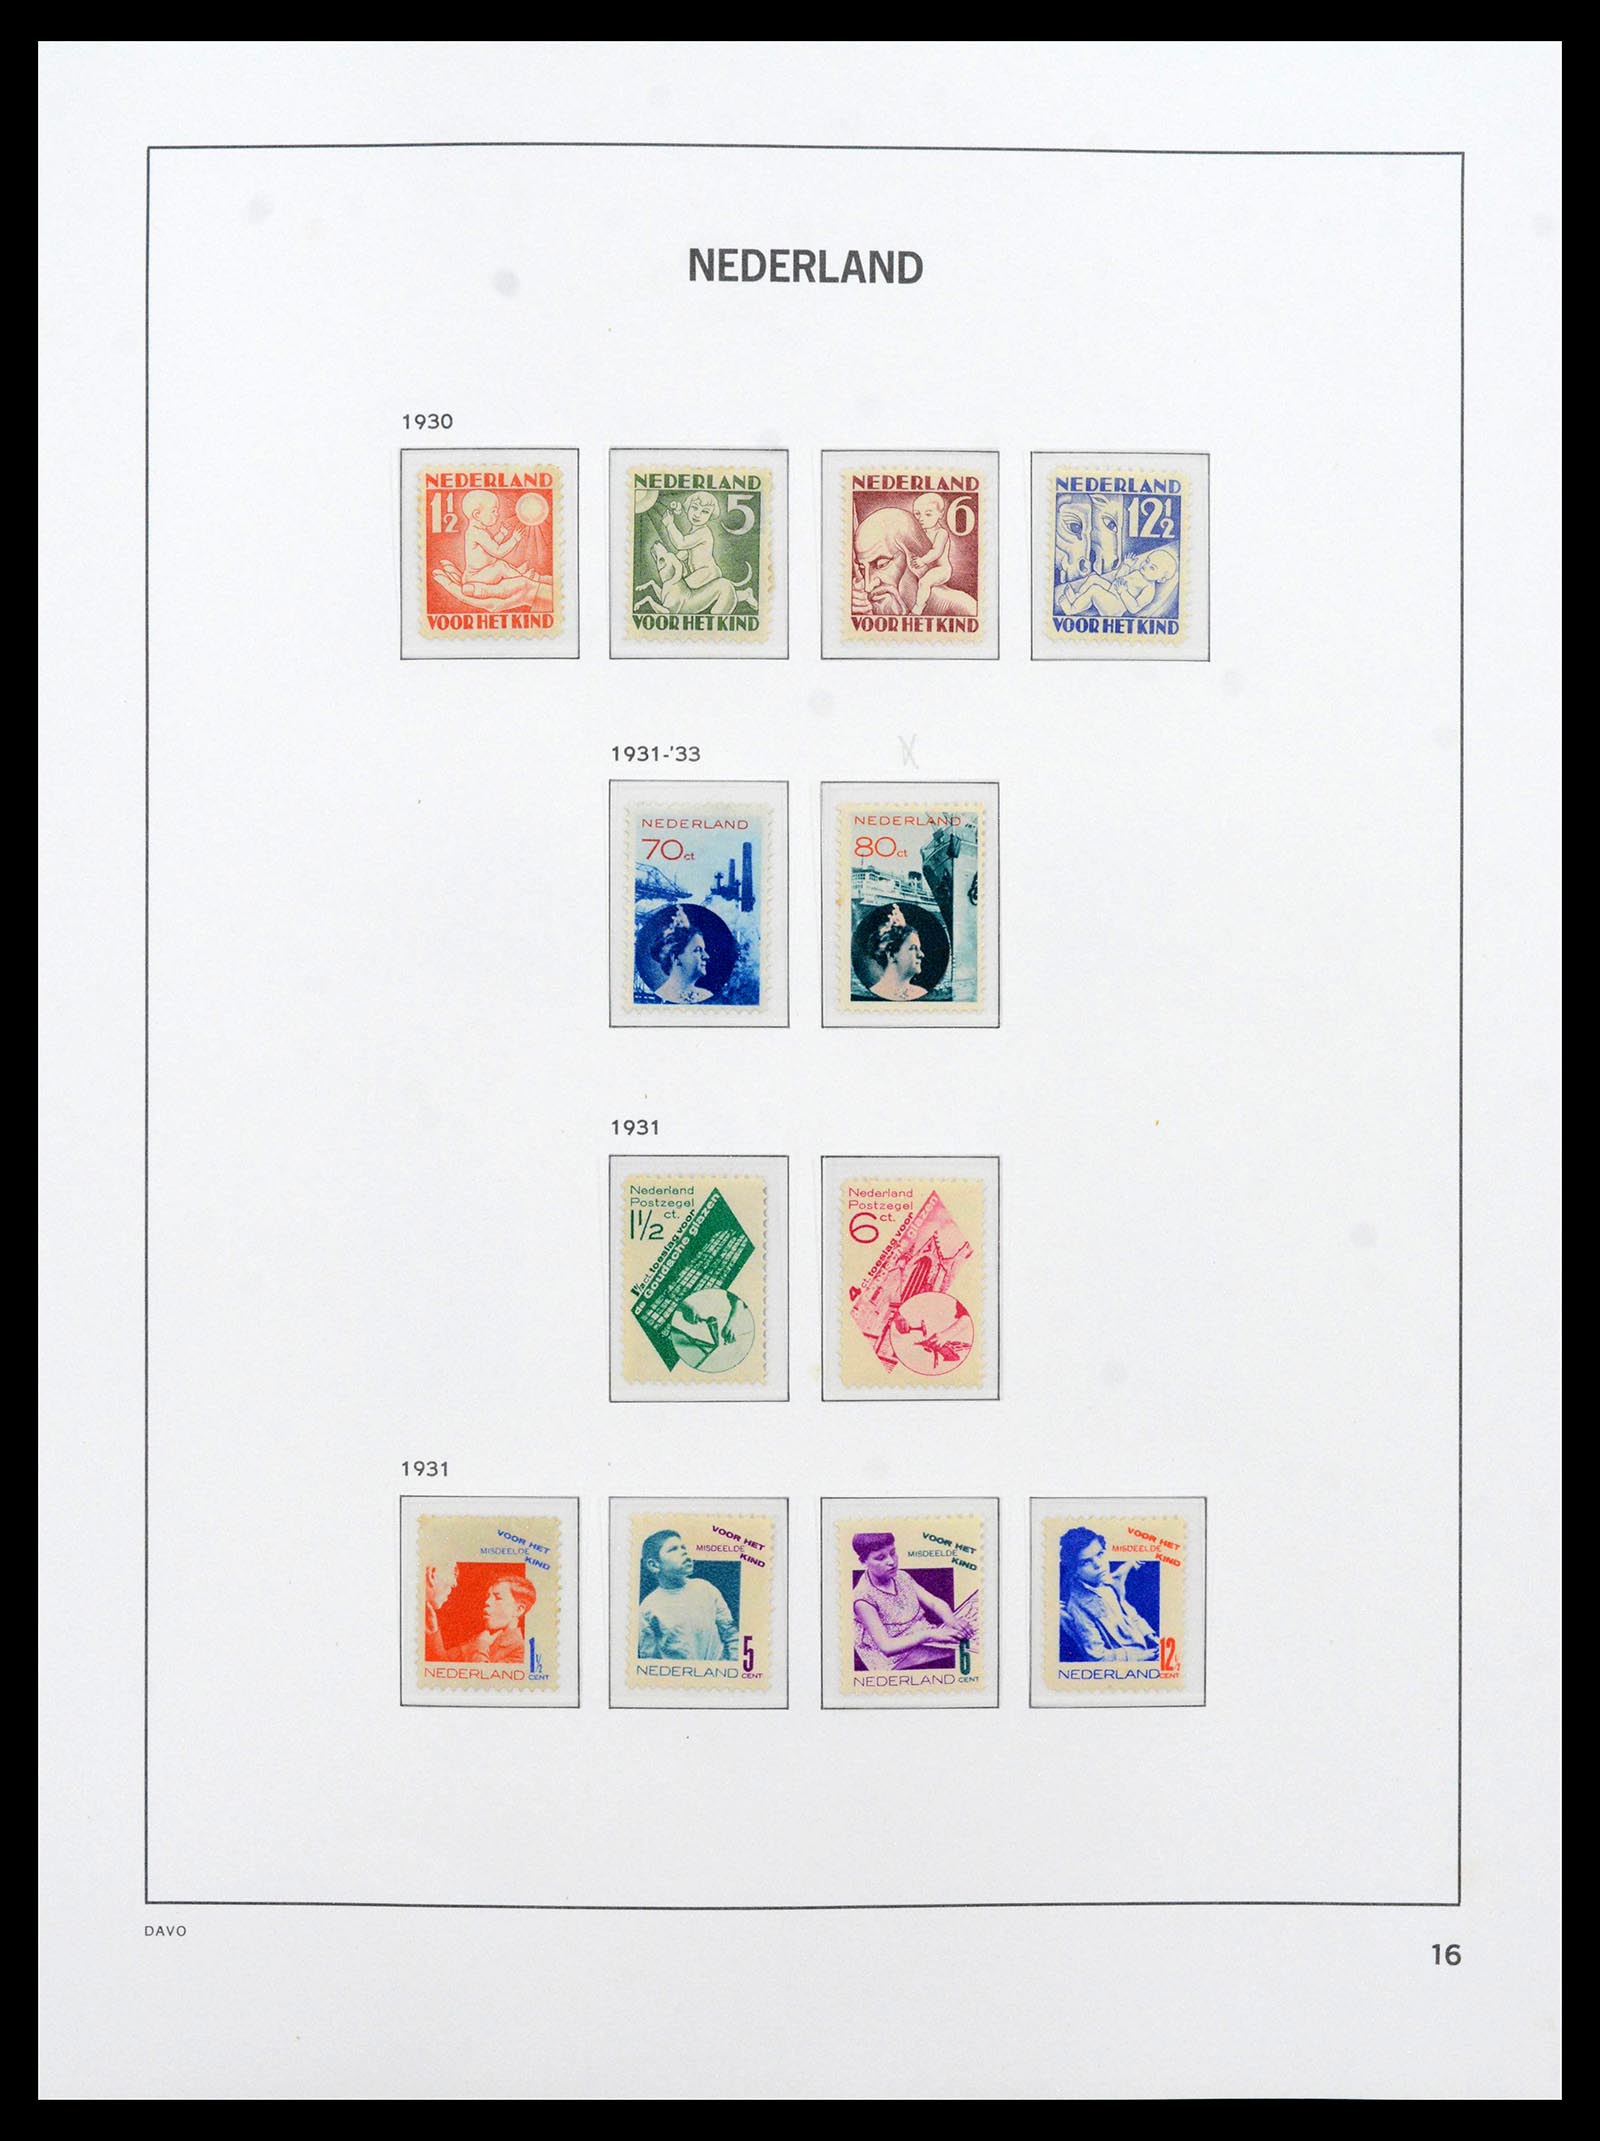 39035 0016 - Stamp collection 39035 Netherlands 1852-1968.